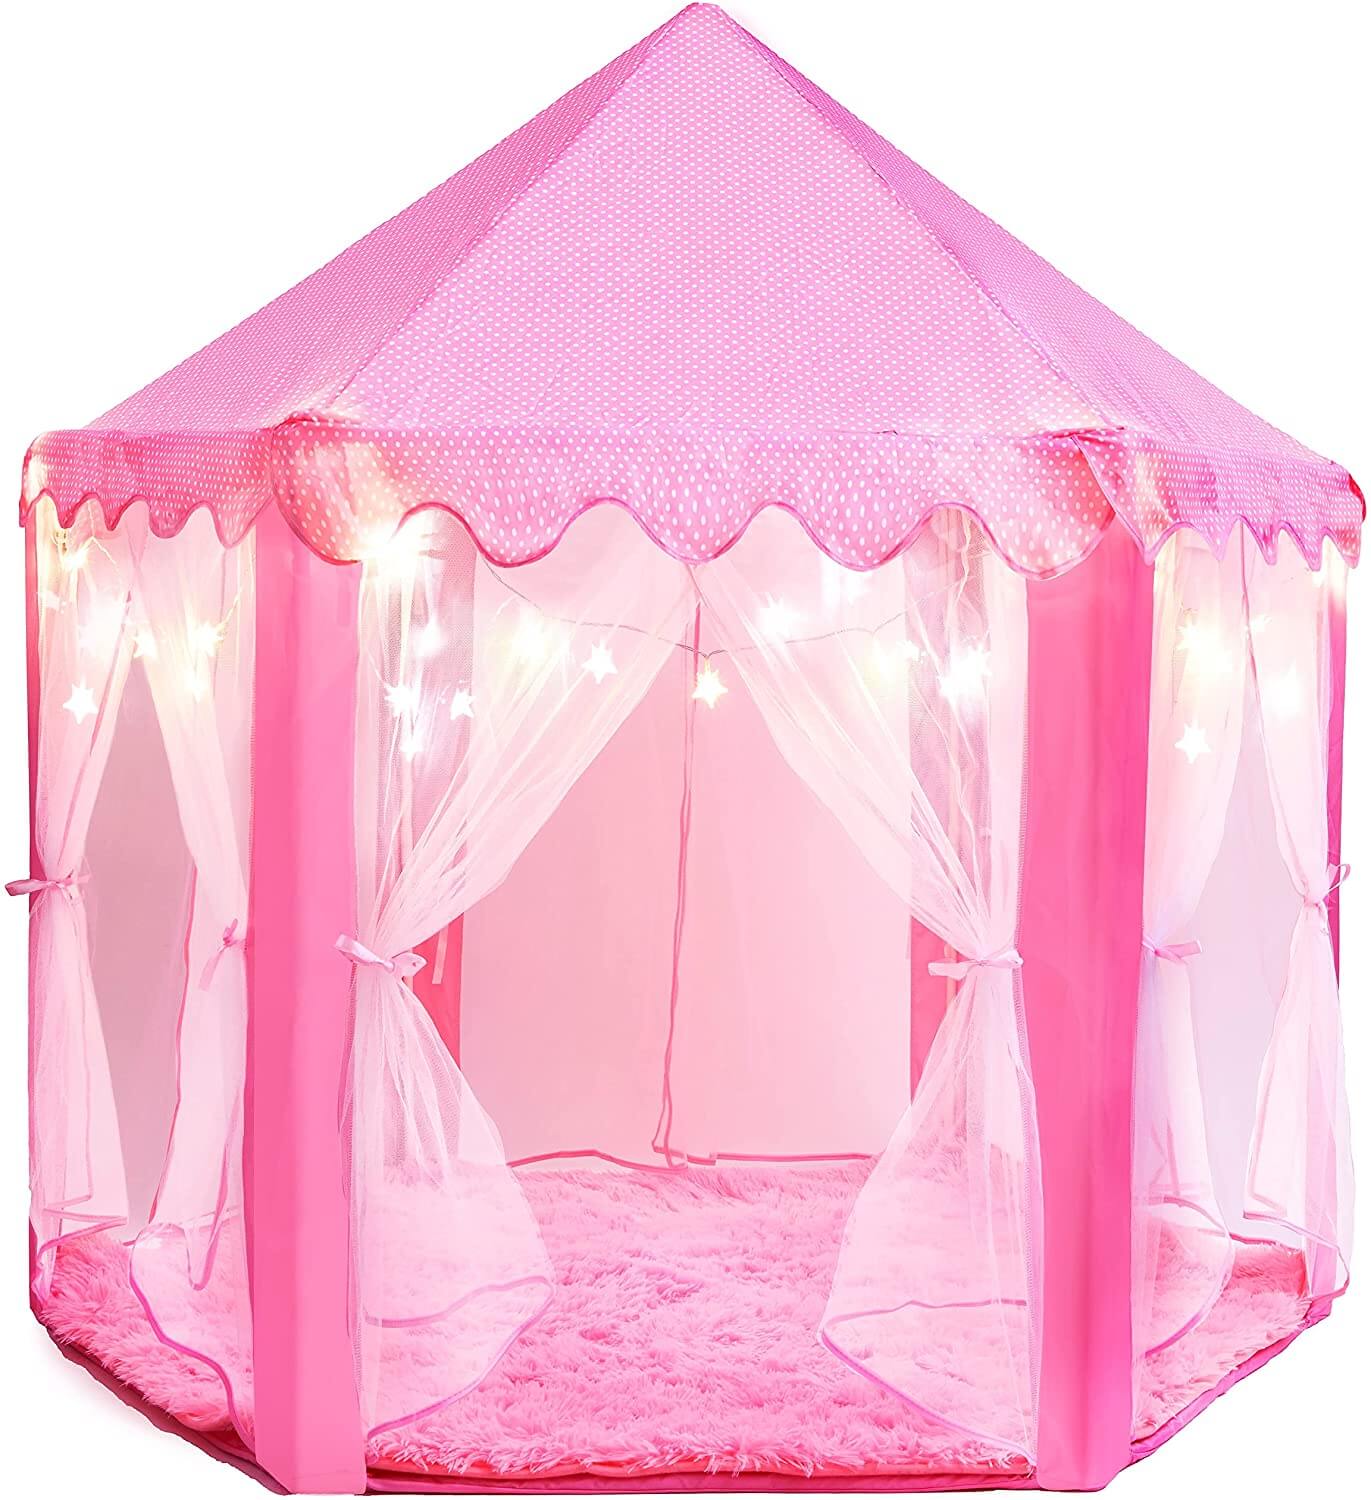 Pink Princess Castle Play Tent with Led Star Lights - LINWEY - Best Pink Princess Castle Play Tent with Led Star Lights